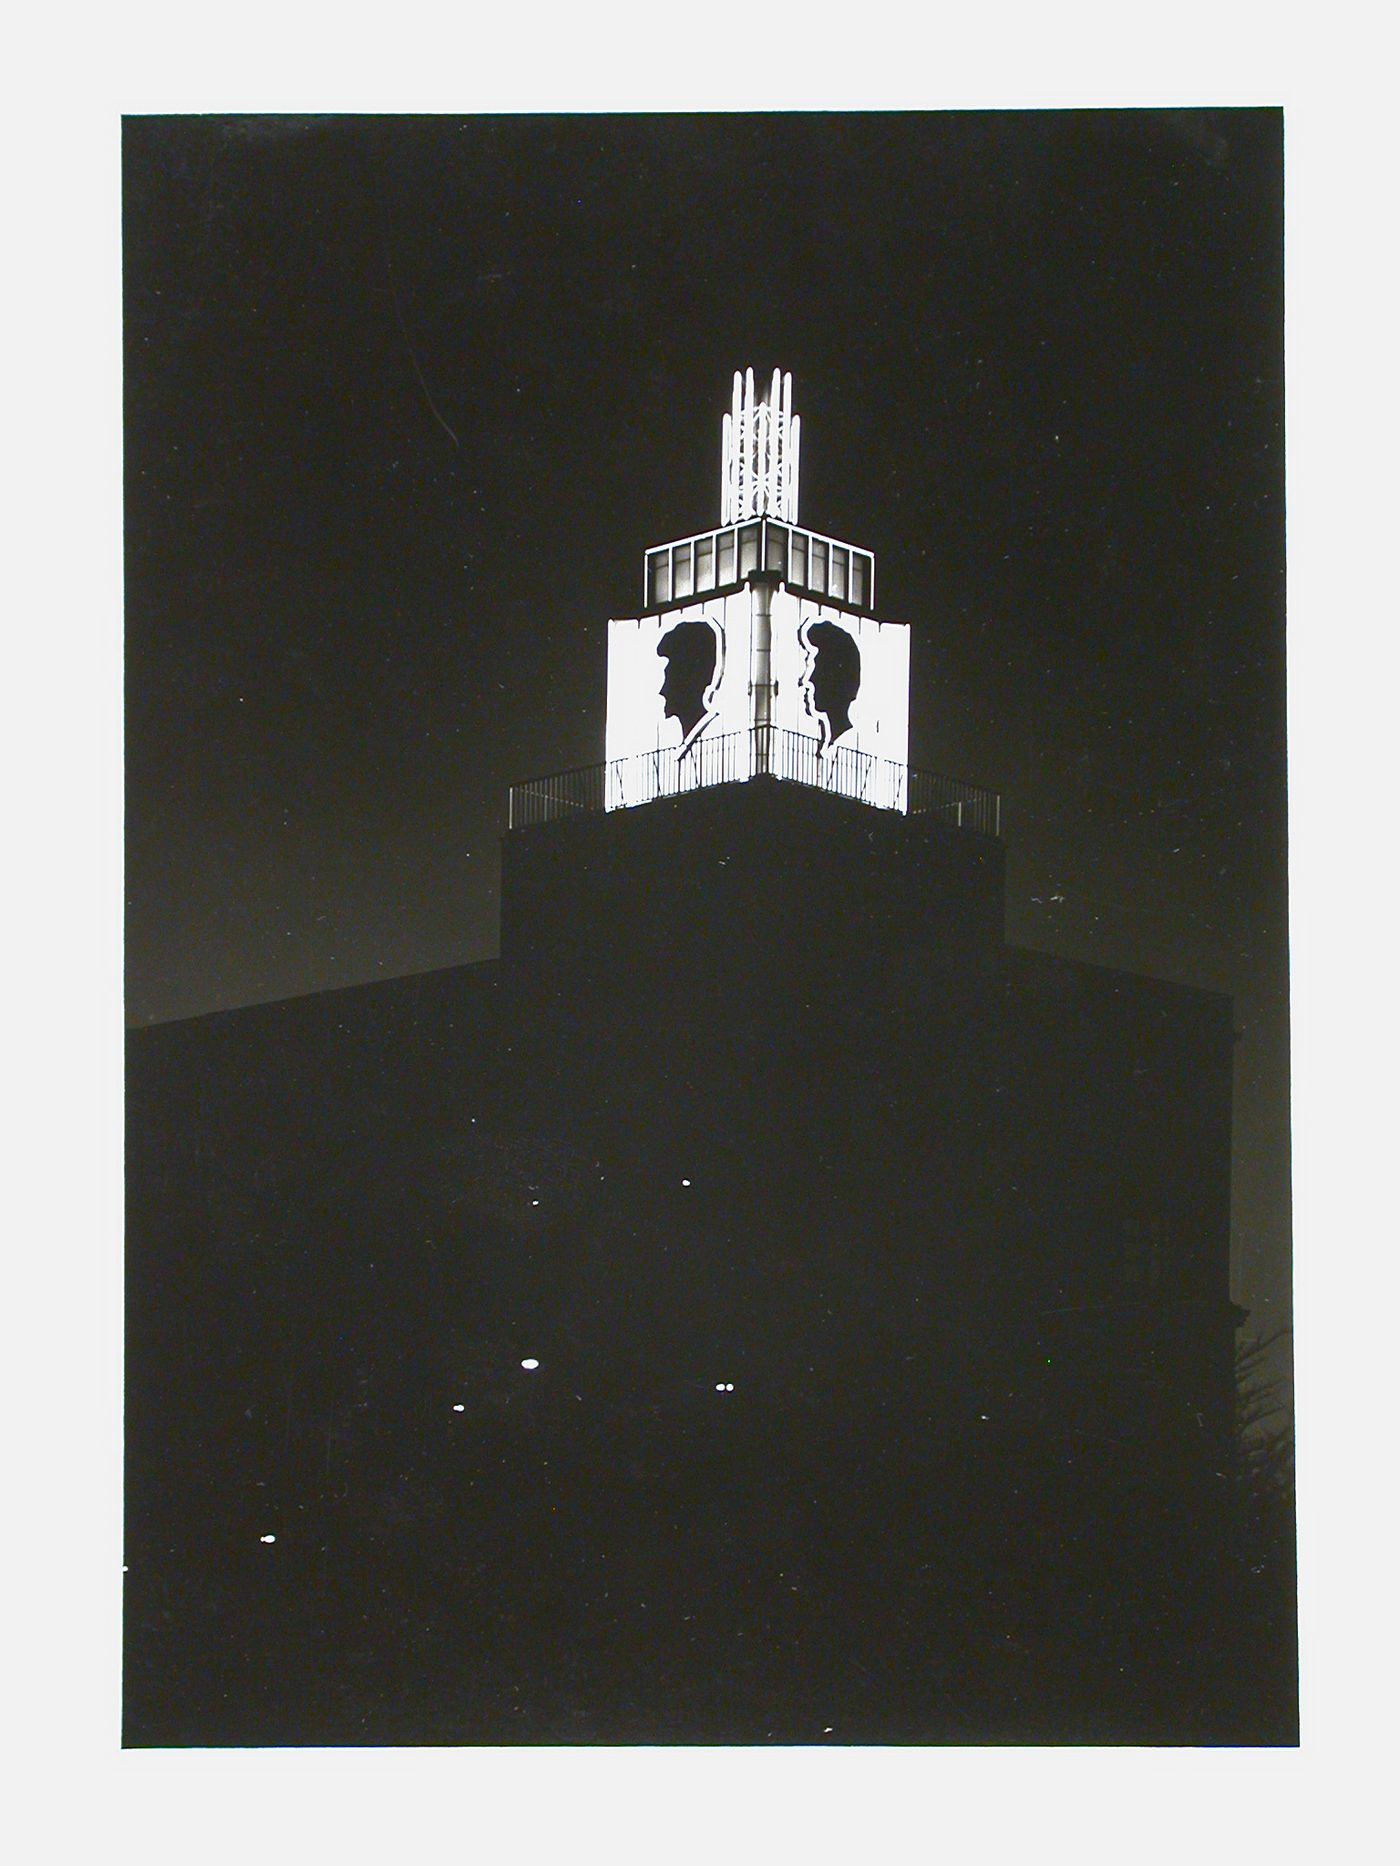 Night view of illuminated tower with profile silhouette on two sides of tower, Berlin, Germany